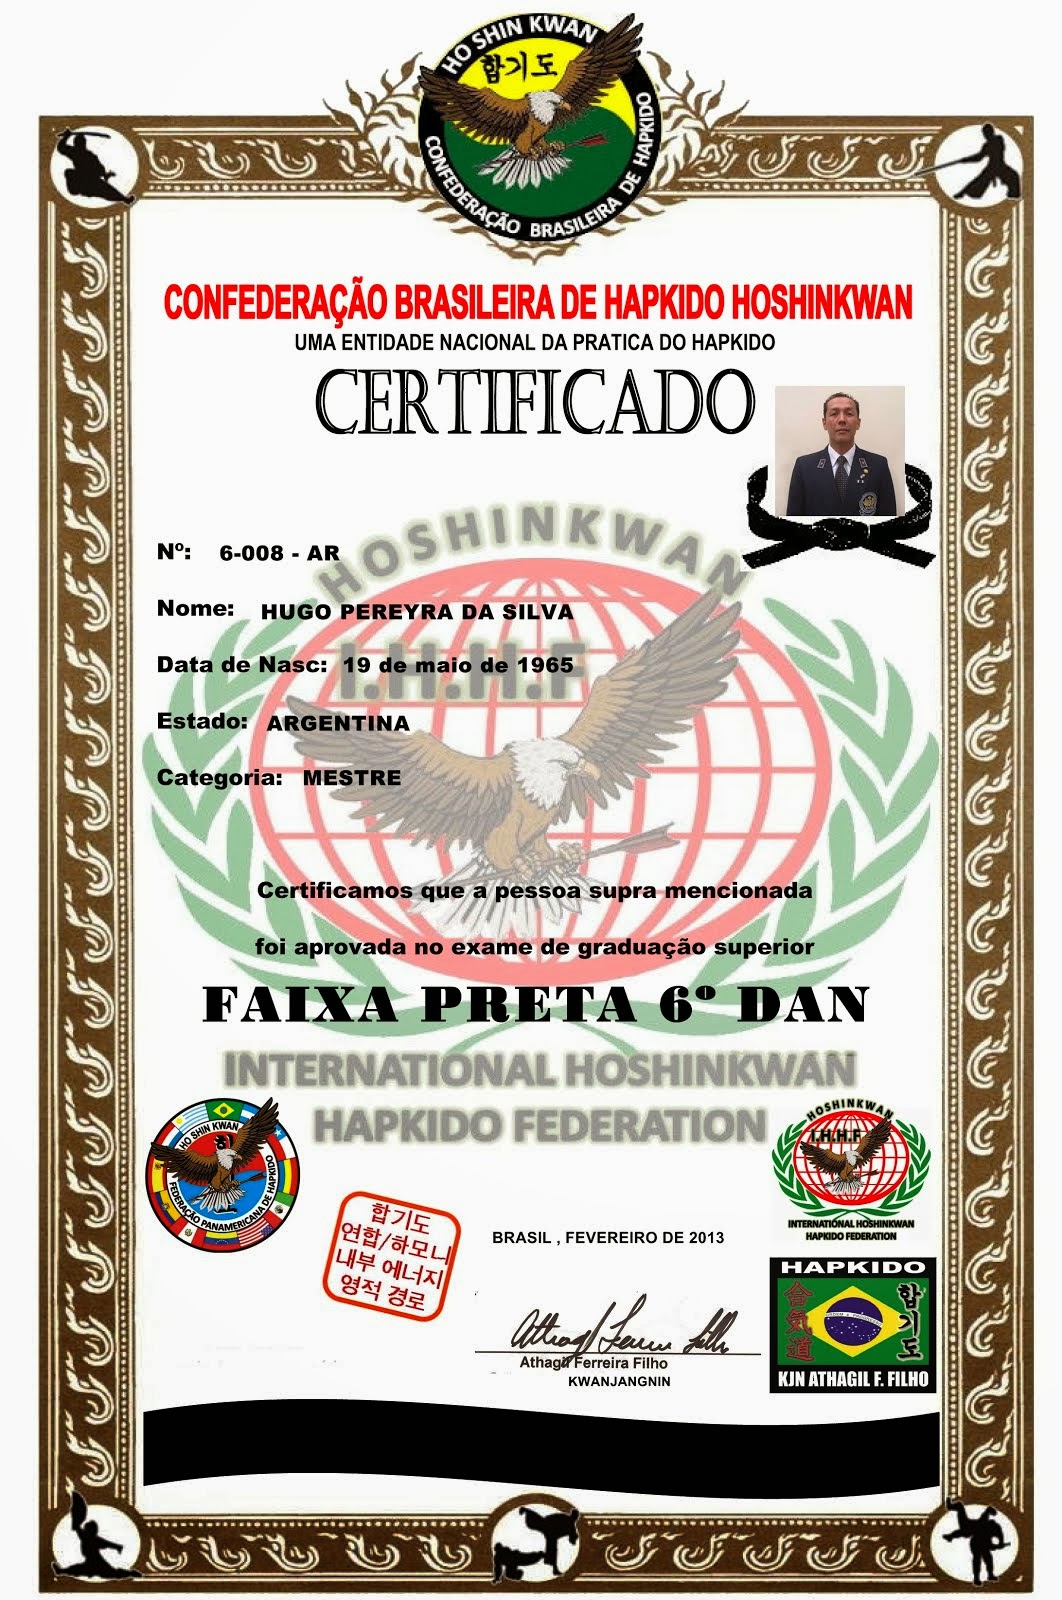 South American Hapkido